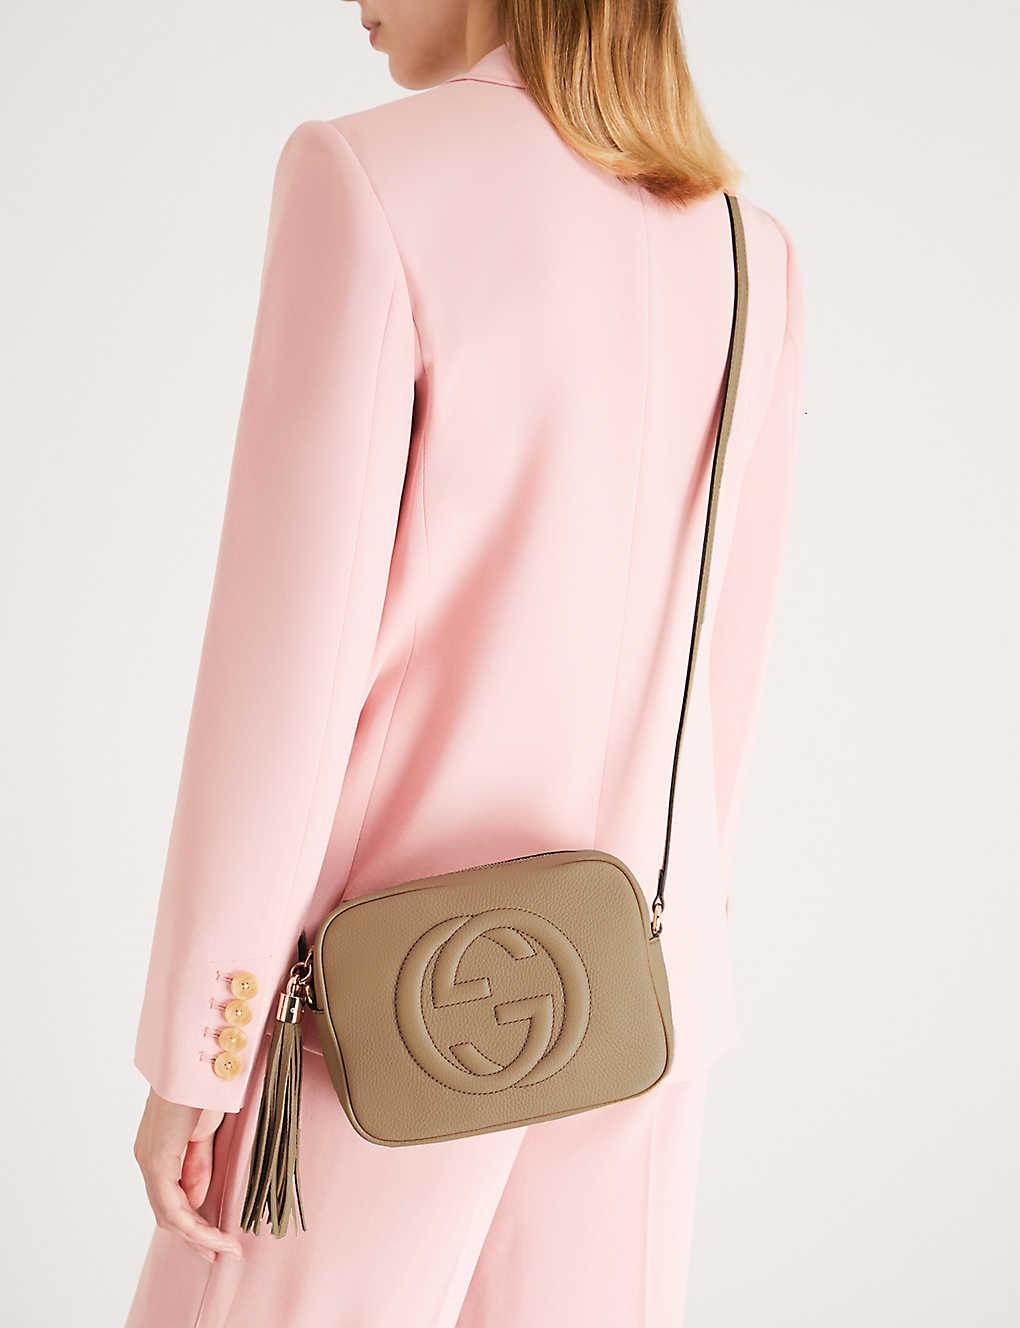 Gucci Soho Leather Disco Cross-body Bag in Natural | Lyst